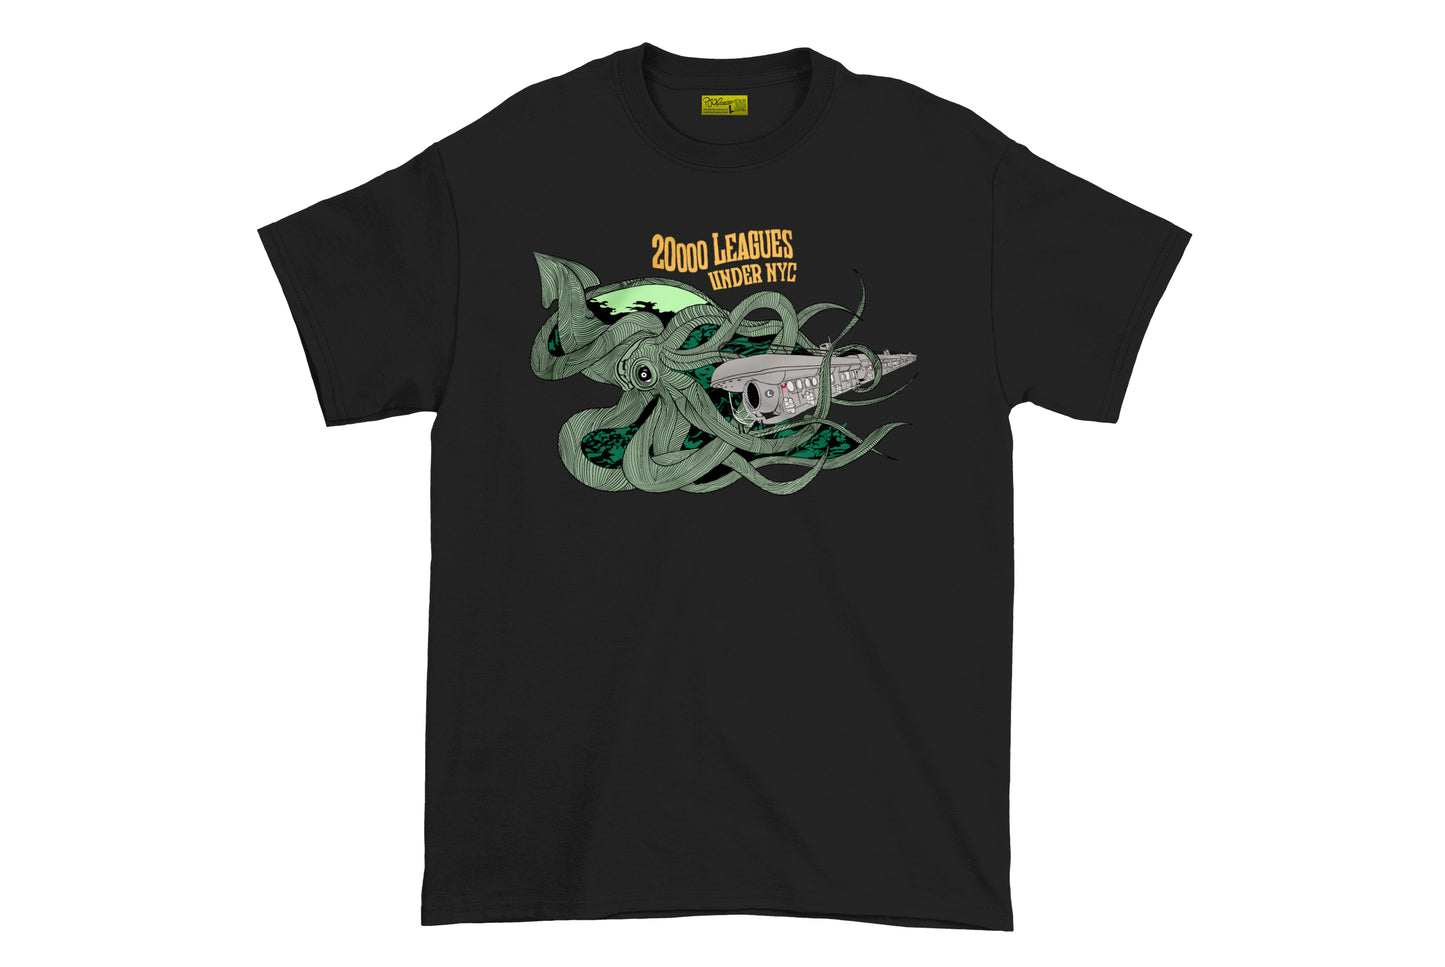 20,000 Leagues Under NYC Heat Transfer on Black T-Shirt